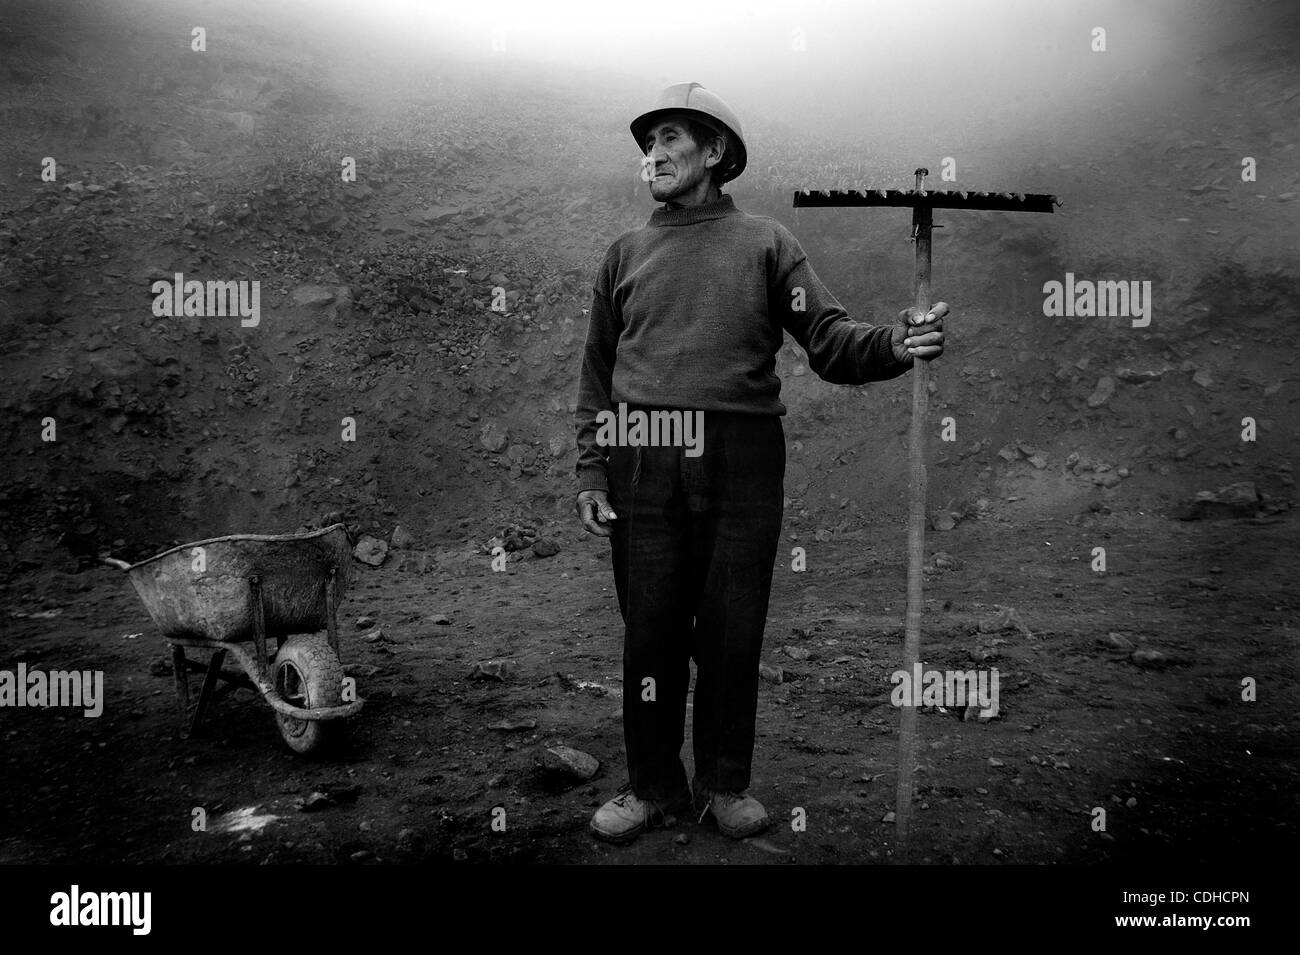 Feb. 3, 2011 - Lima, Peru - An 80 year-old man works 10hrs a day for 25 sol (about 8 dollars) building a road to the highest point in the slum of Bellevista so water can be delivered. (Credit Image: © Michael Francis McElroy/zReportage.com/ZUMA) Stock Photo